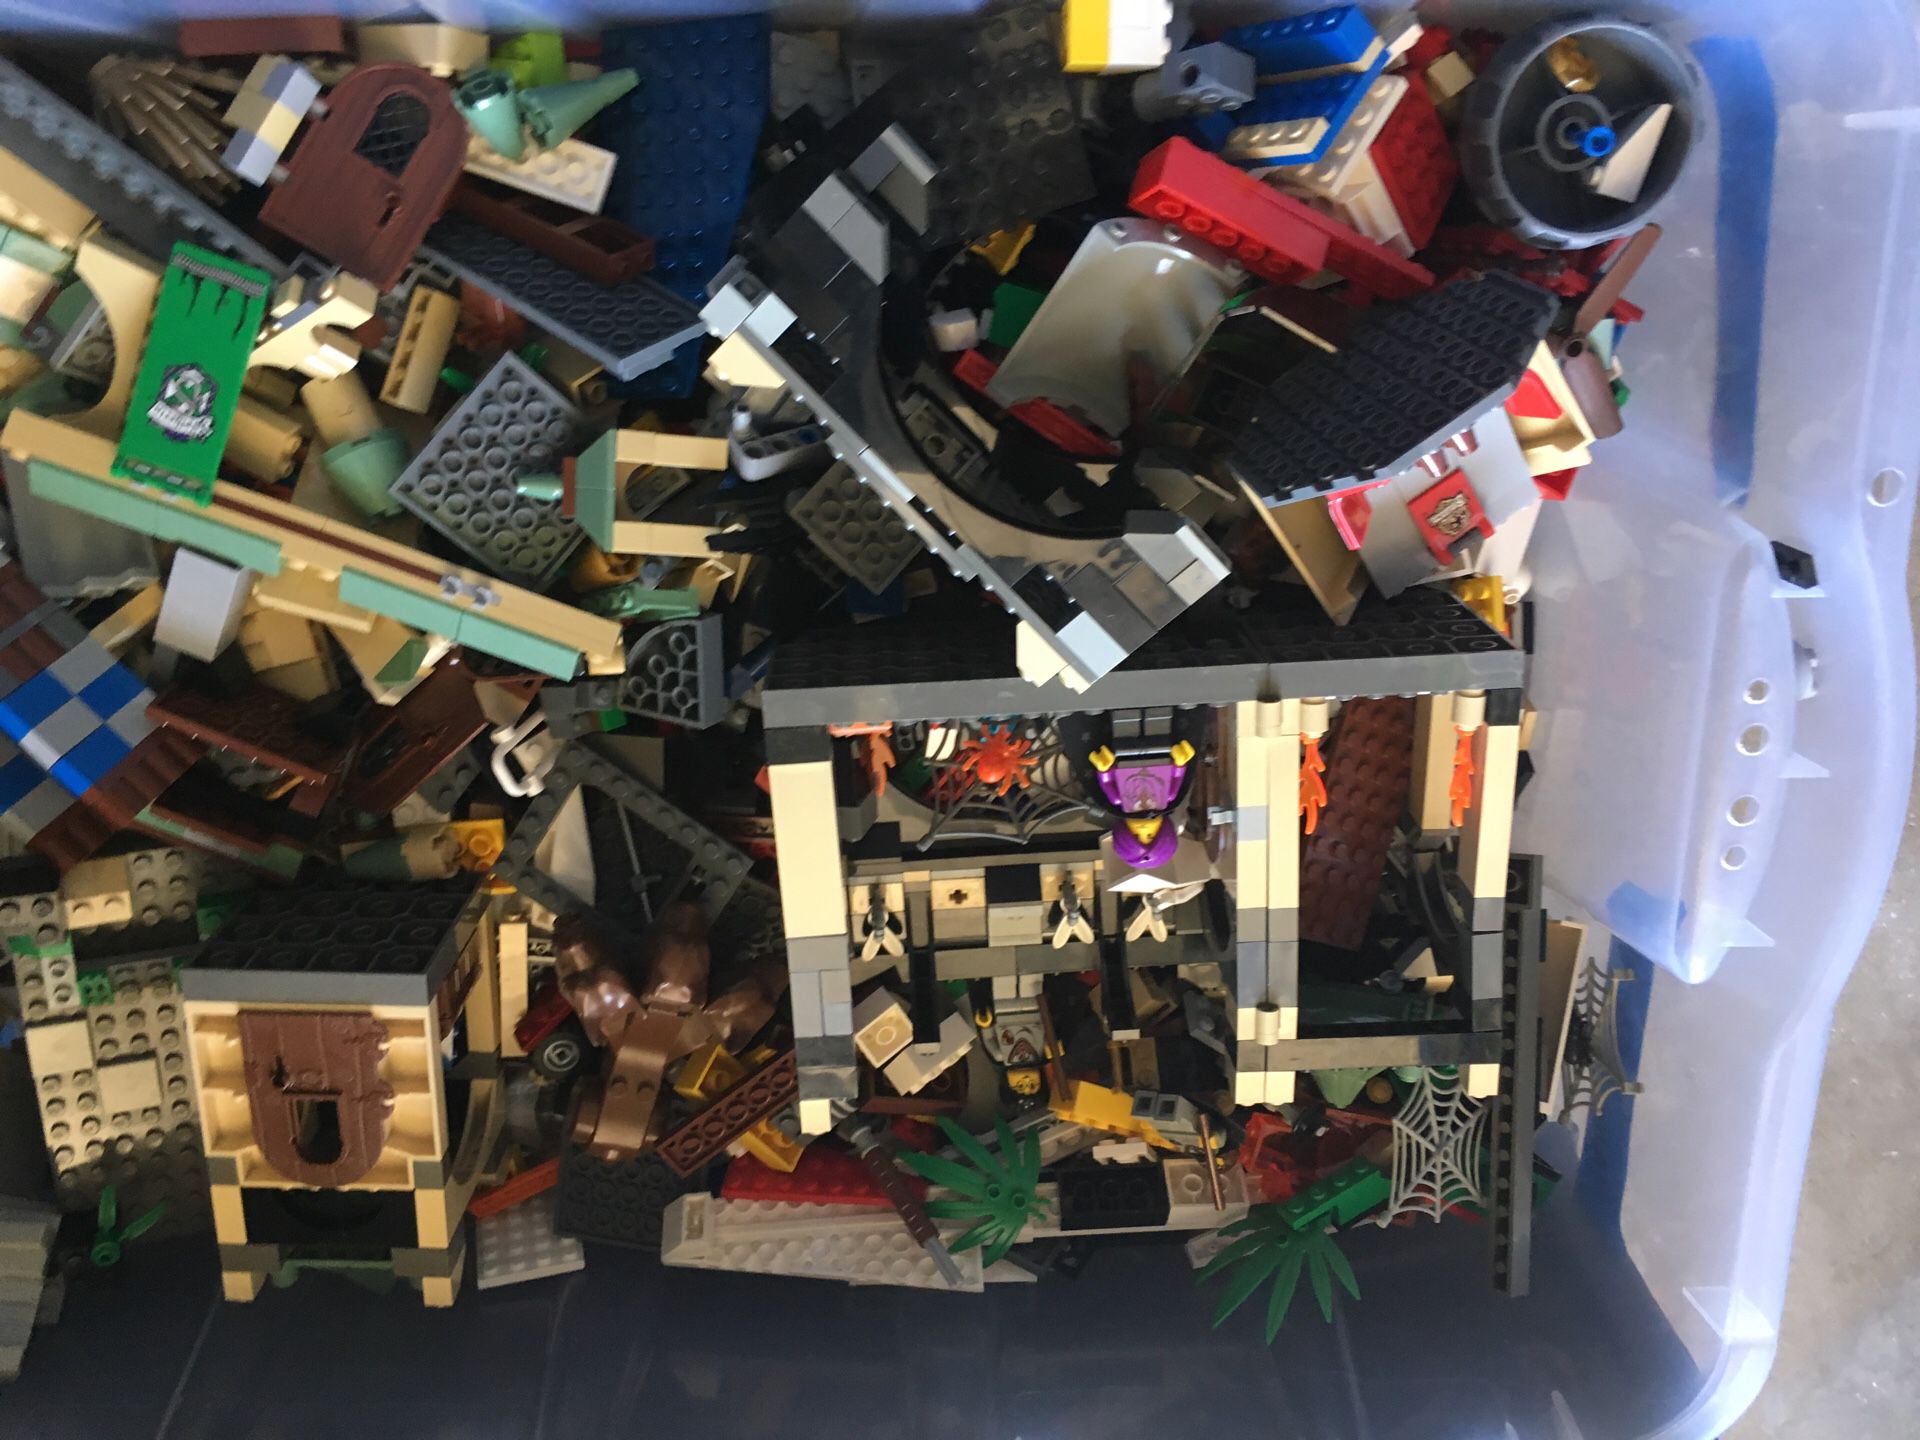 Lego Harry Potter Bin with minifigures. 25 pounds